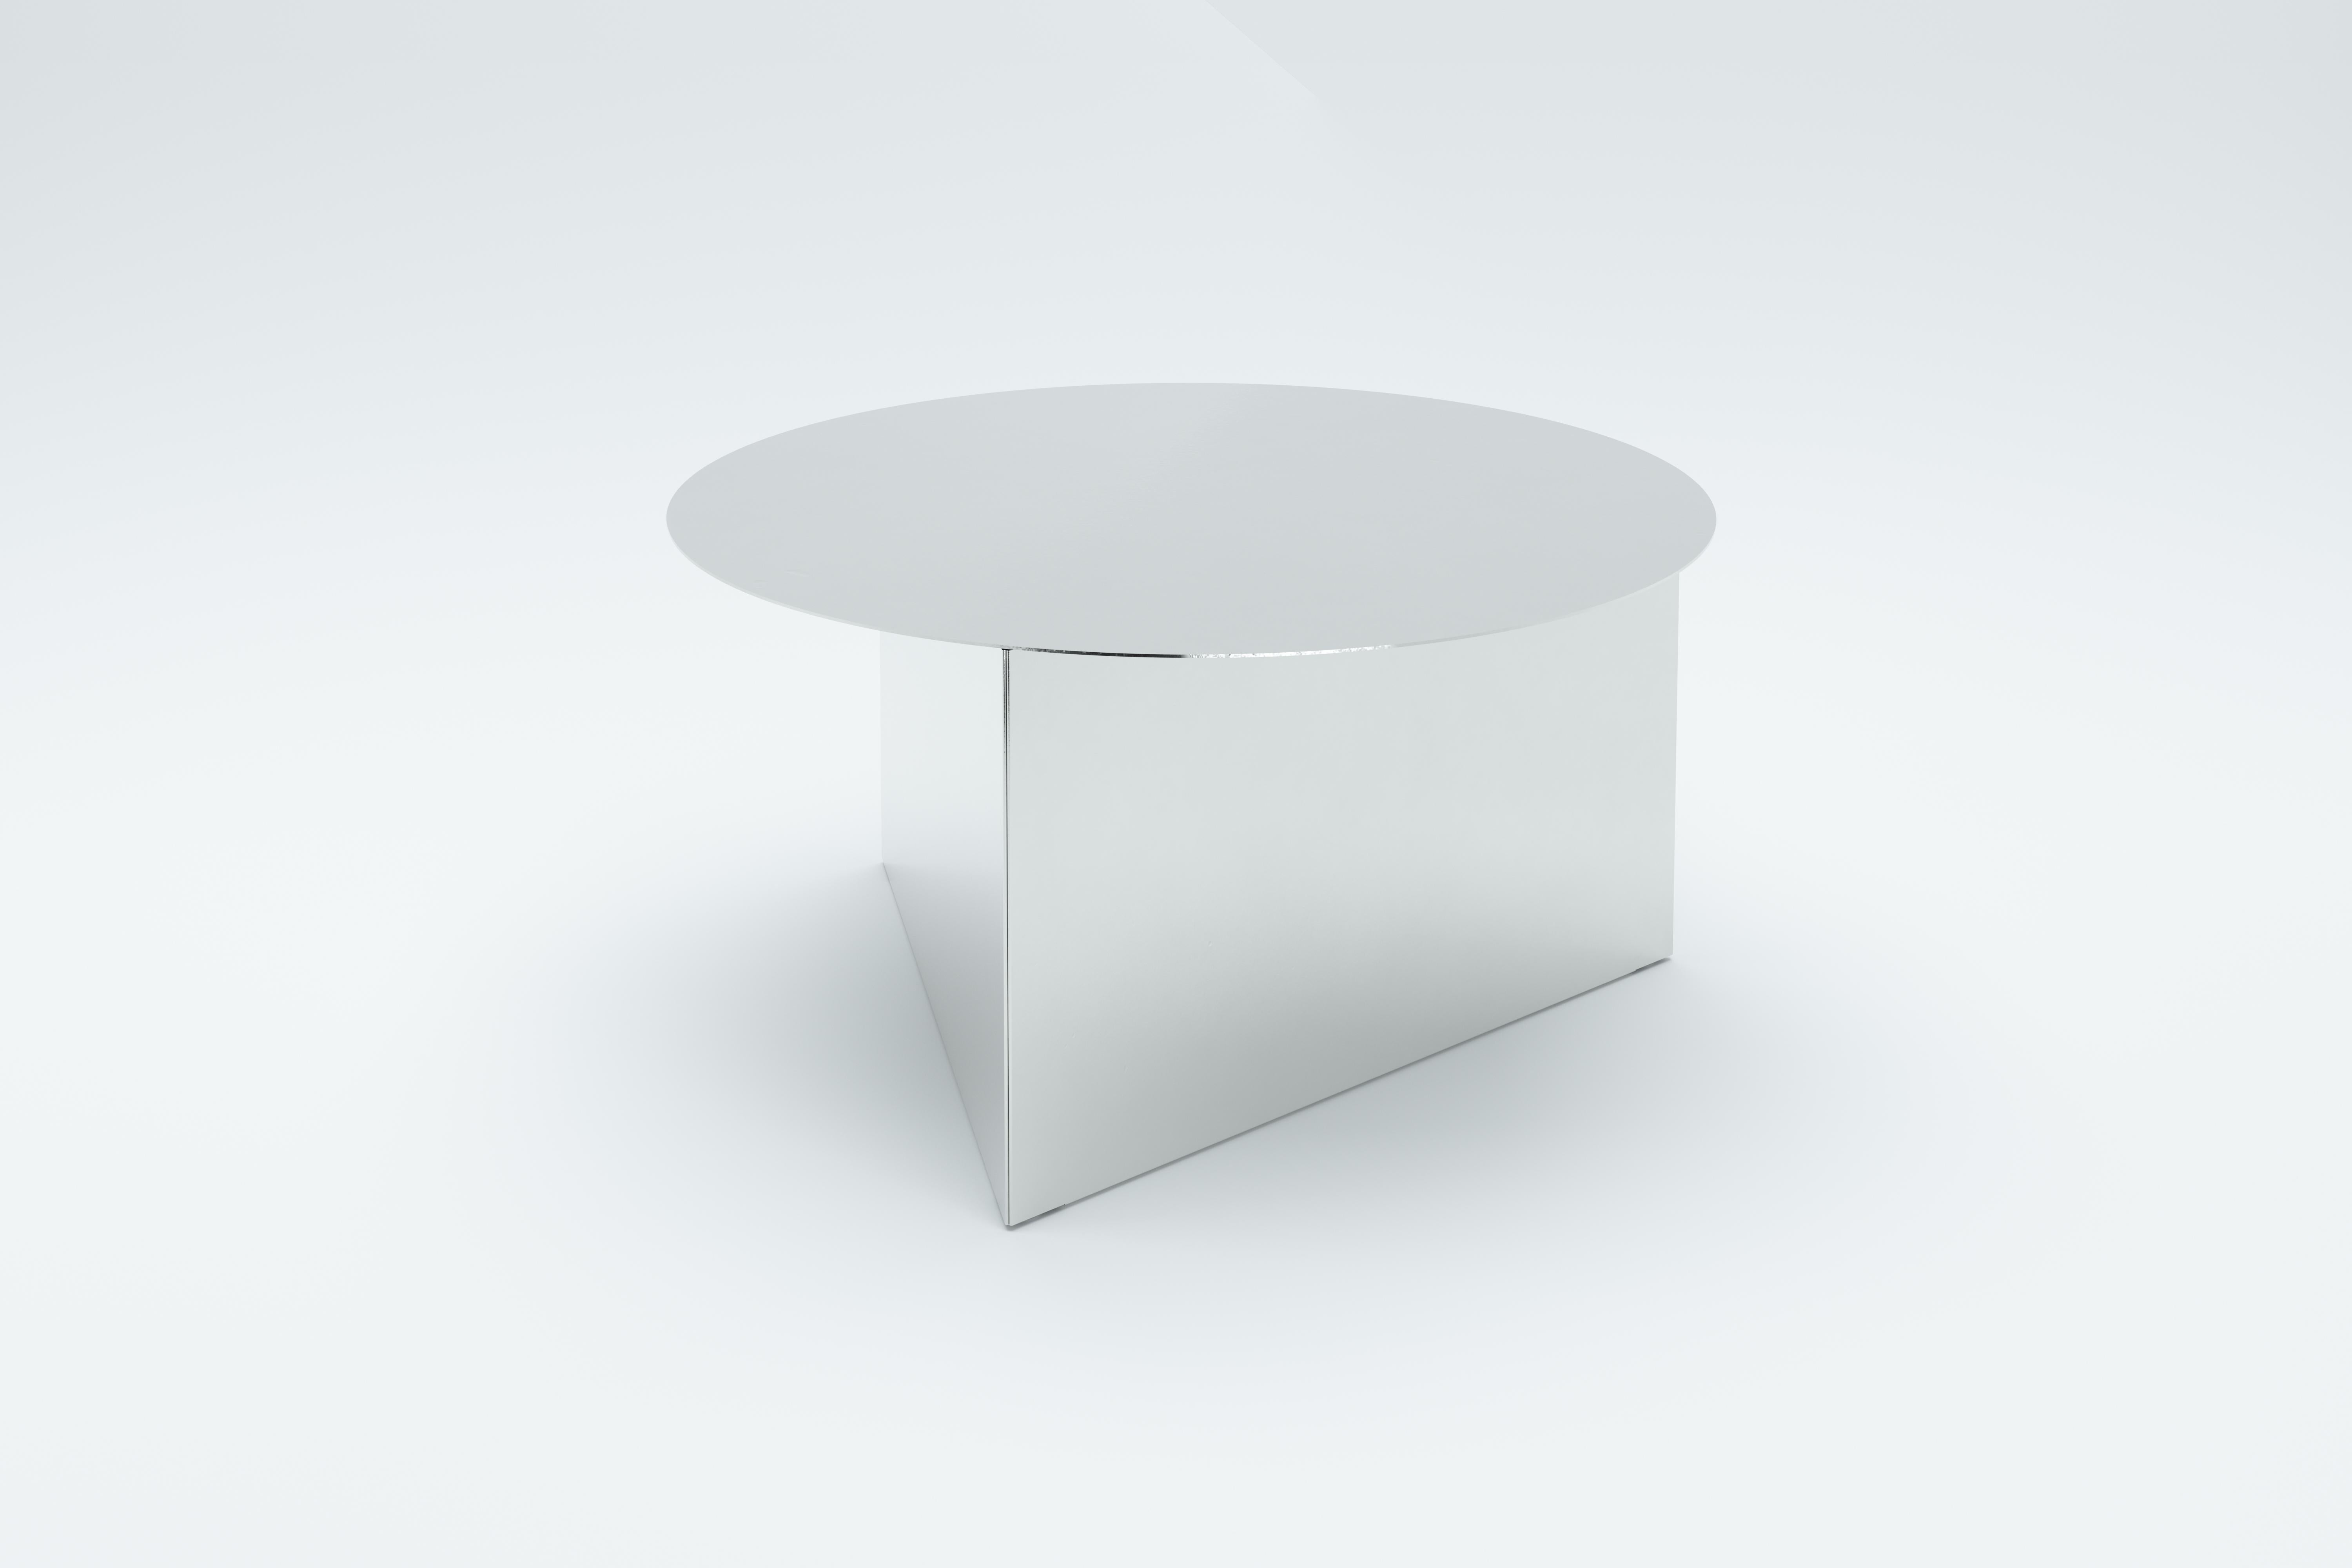 Mirror Prisma circle 70 coffee table by Sebastian Scherer
Dimensions: D 70 x H 35 cm
Materials: Mirror.
Weight: 13.9 kg.
Also available: mirror silver (stainless steel), mirror gold (brass coated stainless steel / mirror black (black coated